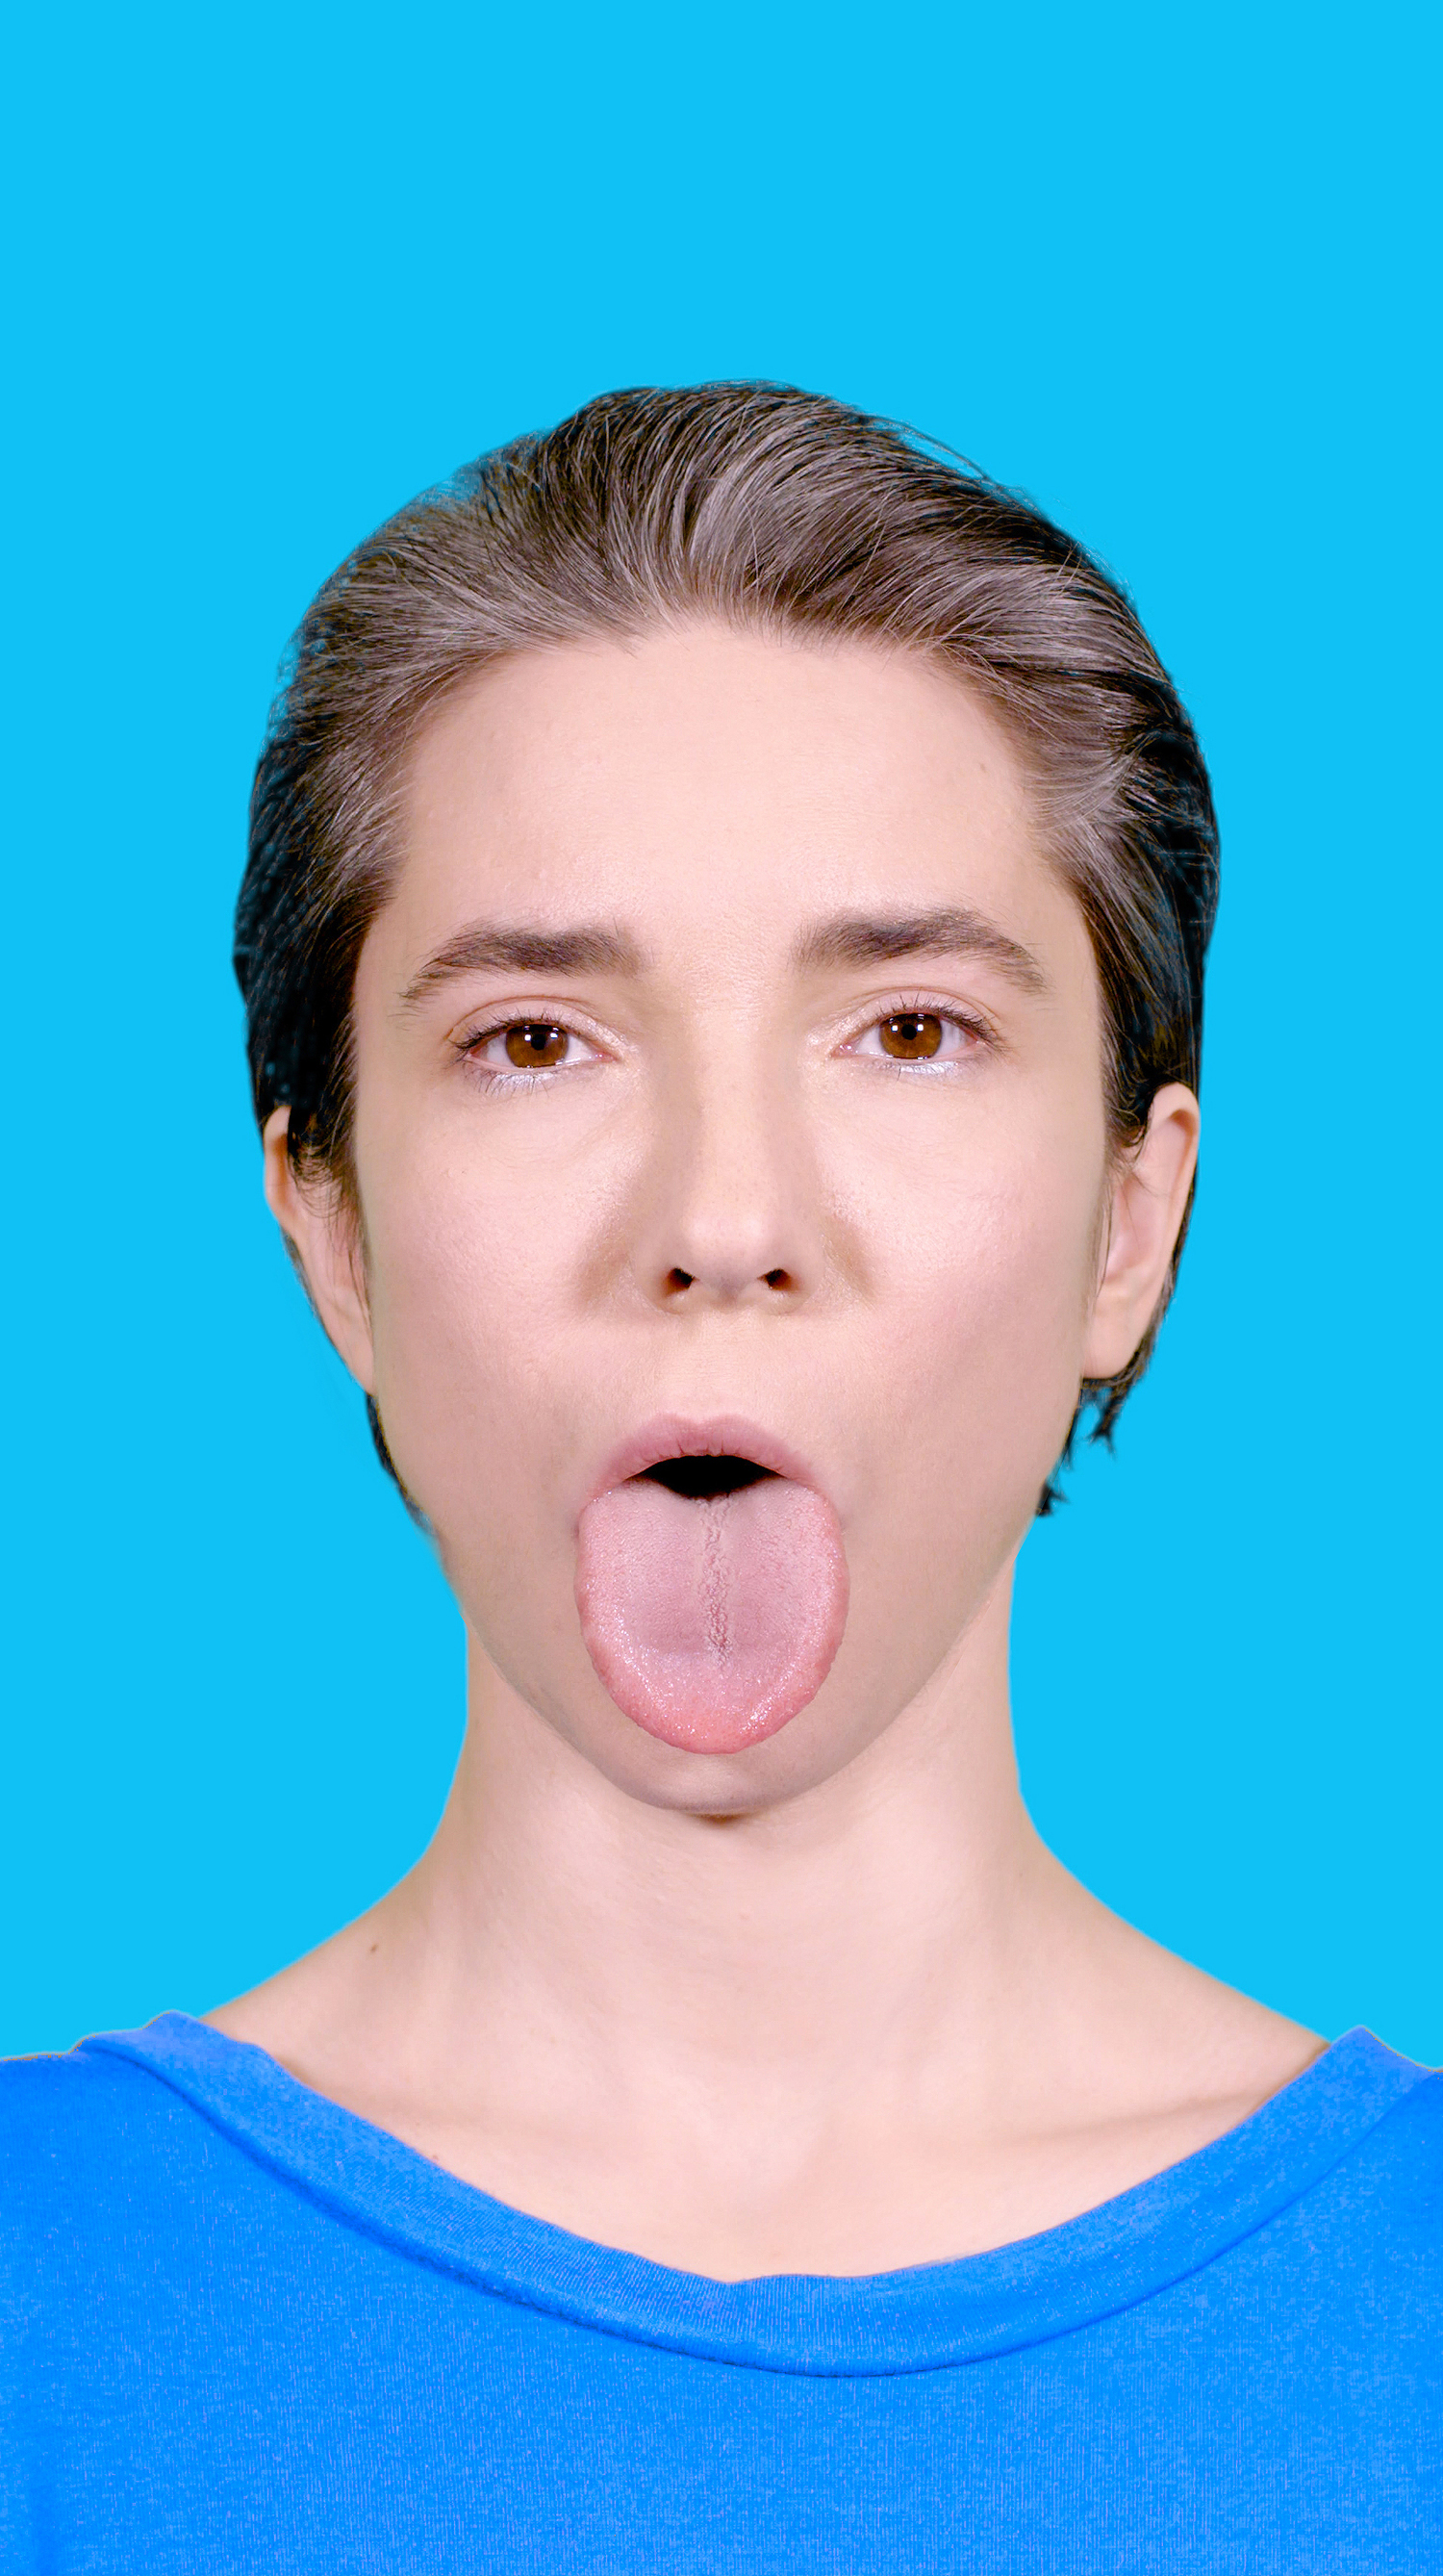 The screenshot shows a woman sticking her tongue frontally into the camera.